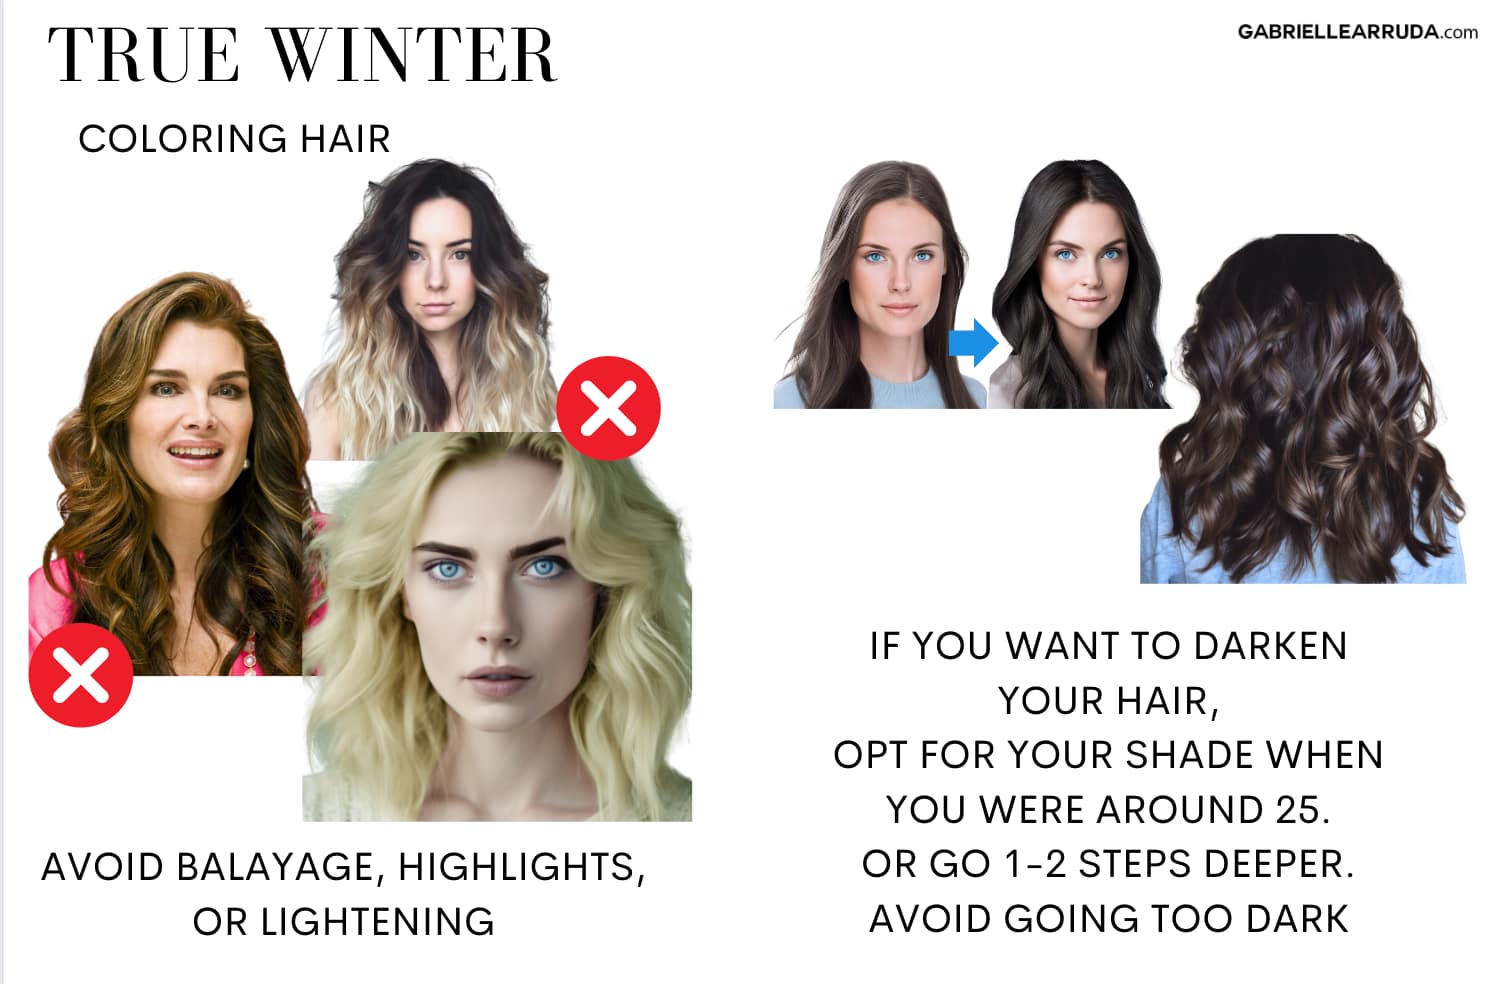 true winter hair coloring do's and don'ts